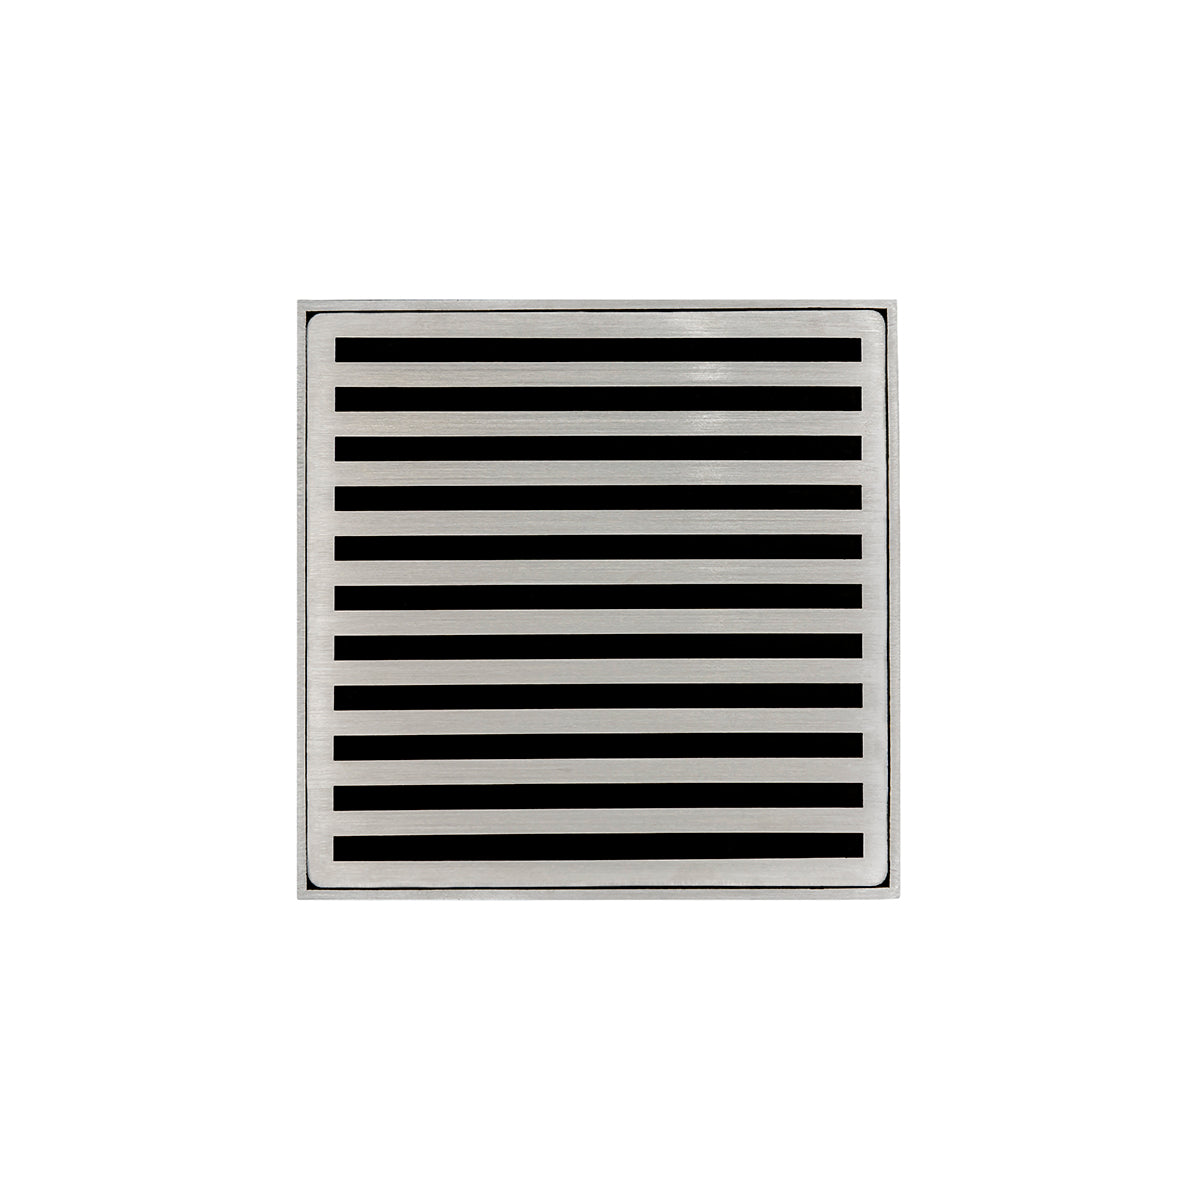 Infinity Drain 5" x 5" ND 5 High Flow Premium Center Drain Kit with Lines Pattern Decorative Plate with PVC Drain Body, 3" Outlet